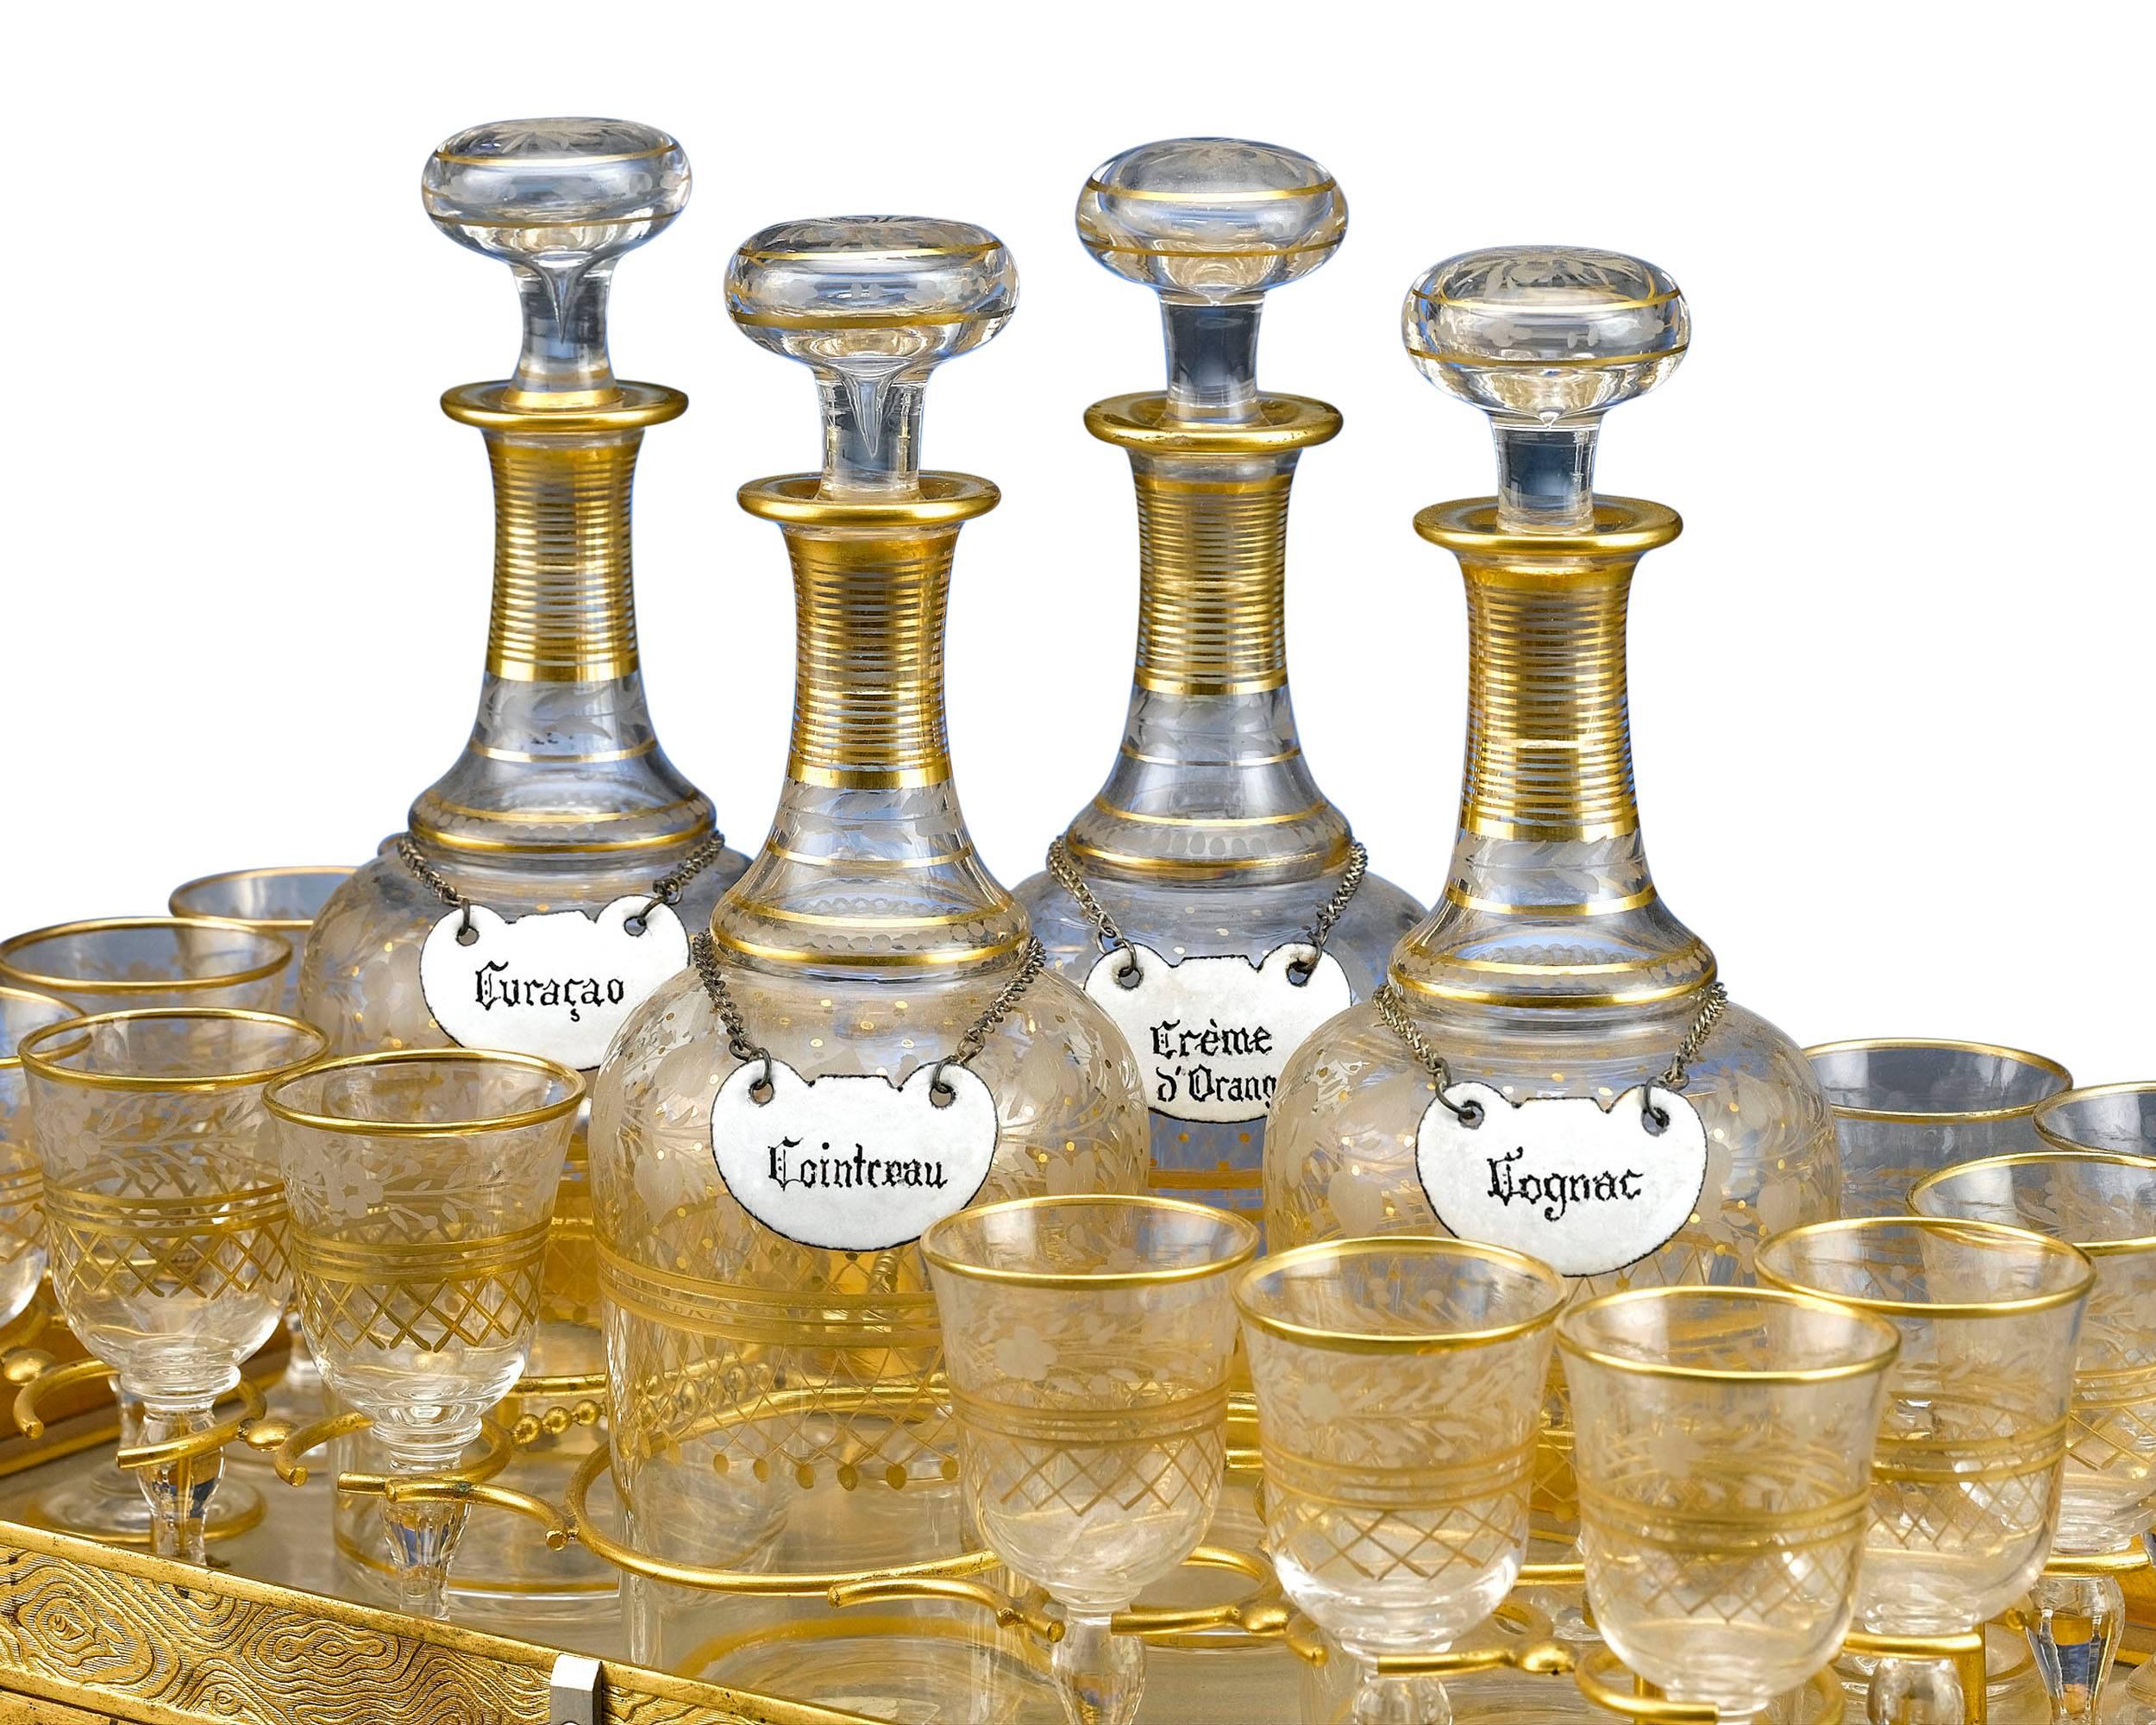 A wonderful and rare cave à liqueur, or Gentleman's Liqueur in the form of a gilt and engraved railway truck. The set is complete with four crystal decanters bearing colorfully enamelled labels (Cassis, Cognac, Anisette and Armanoal) and 16 cordials